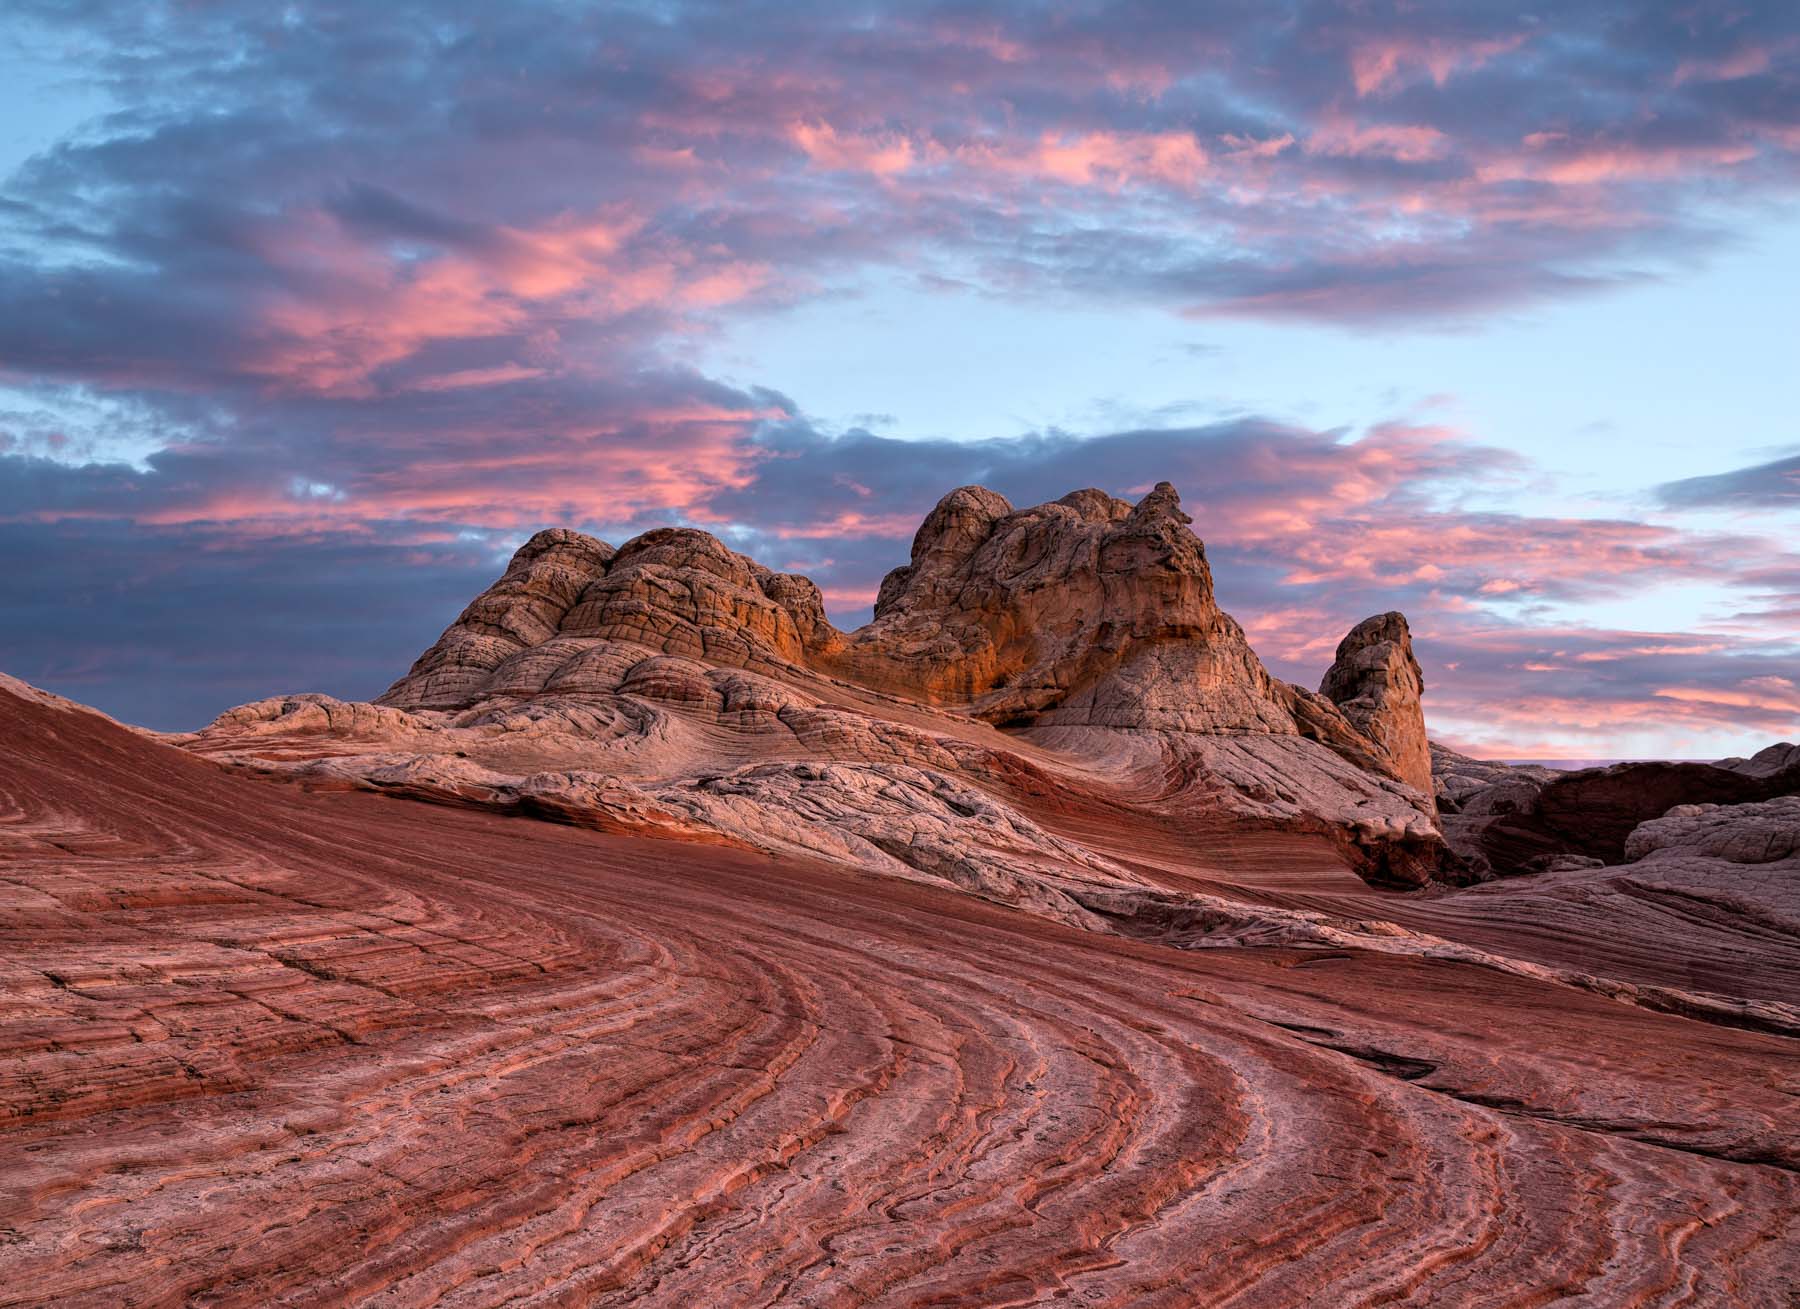 The Citadel at The White Pocket in Vermilion Cliffs National Monument